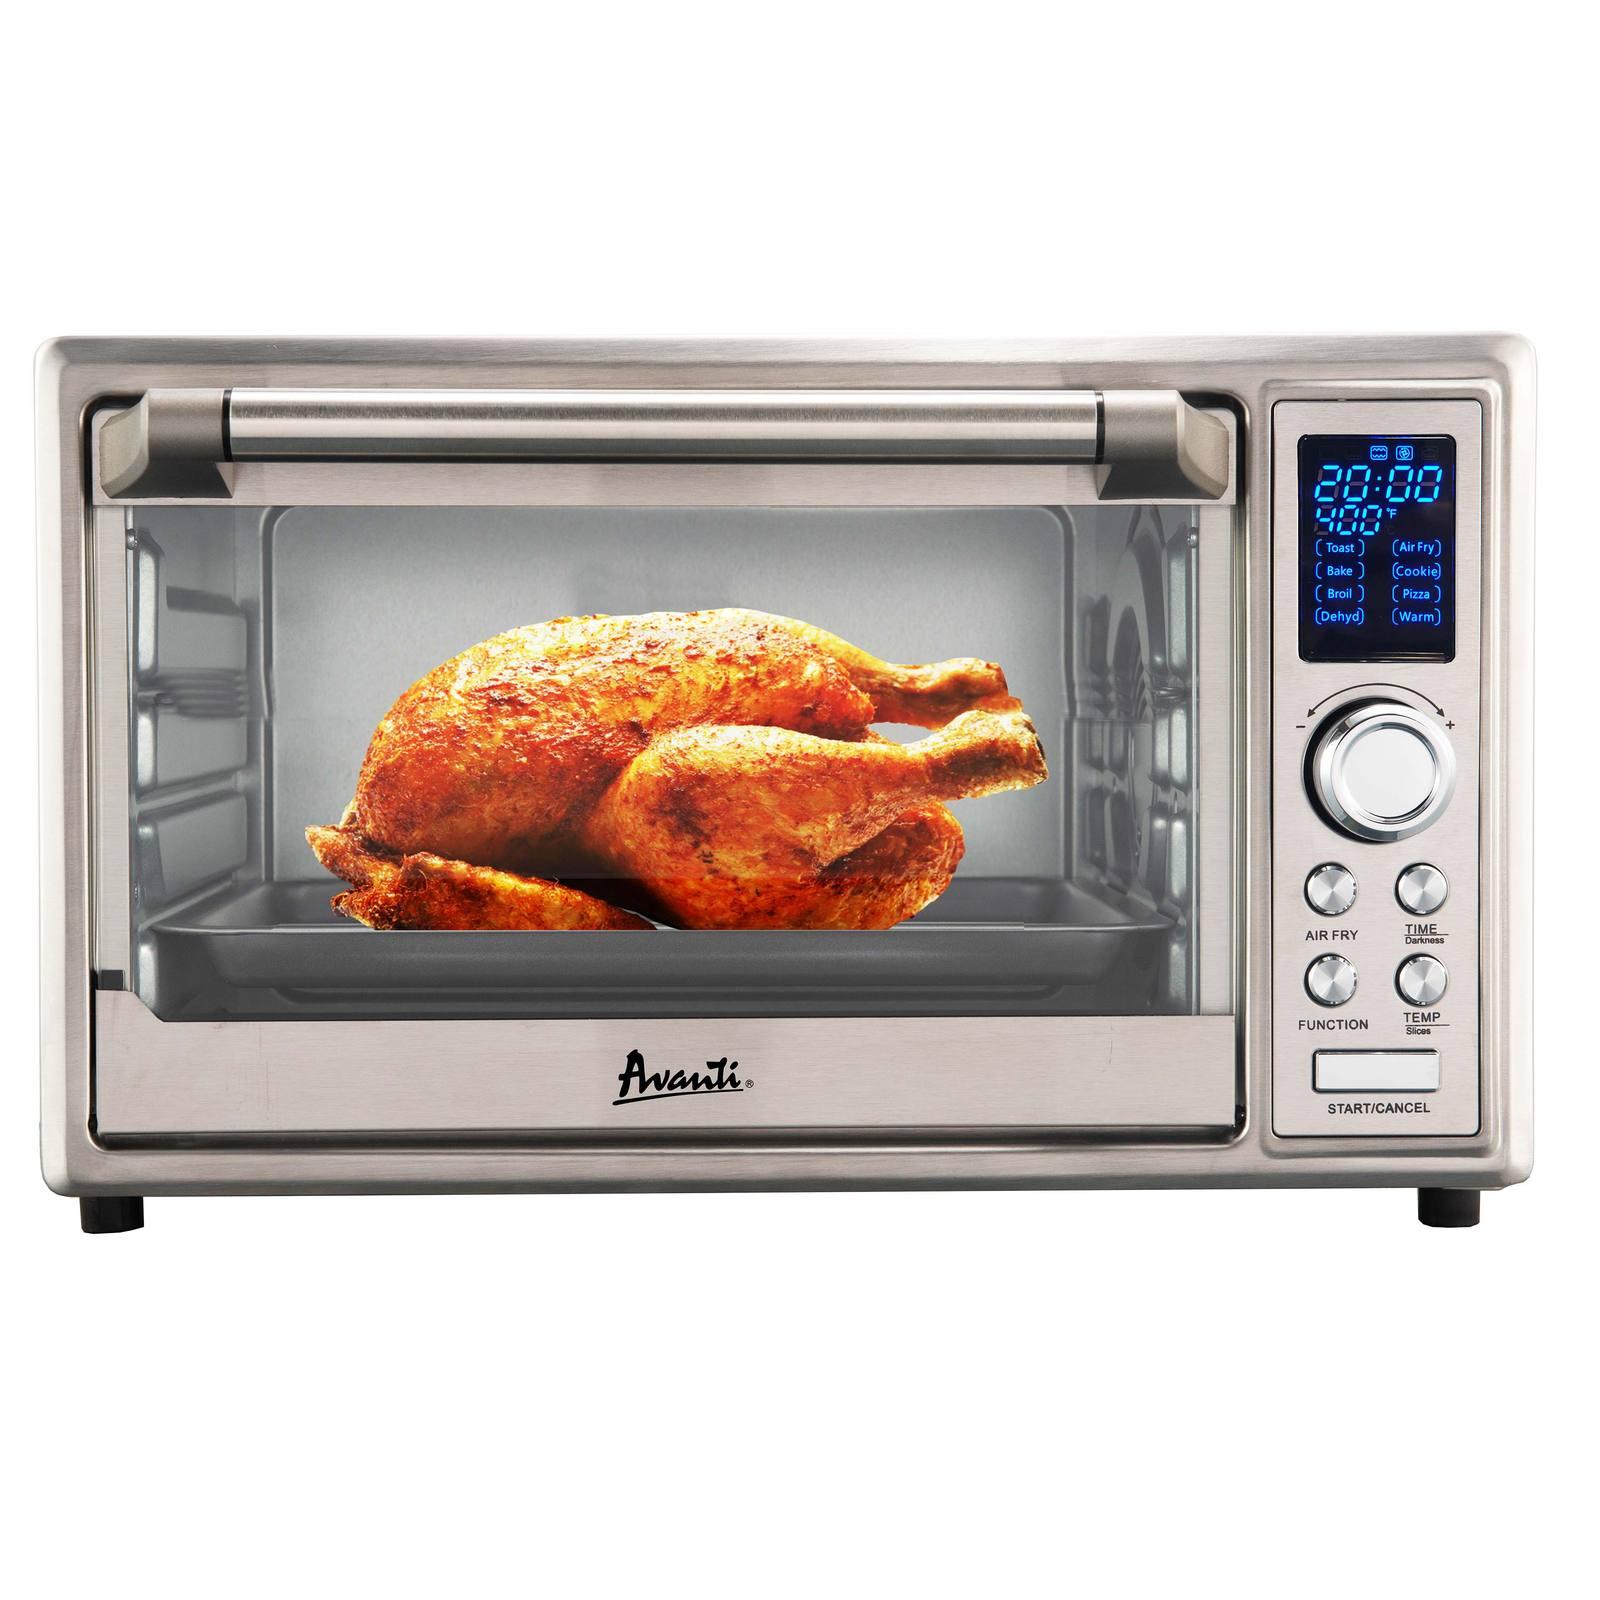 Avanti 0.8 cu. ft. Air Fryer Portable Oven - Stainless Steel / 0.8 cu. ft.